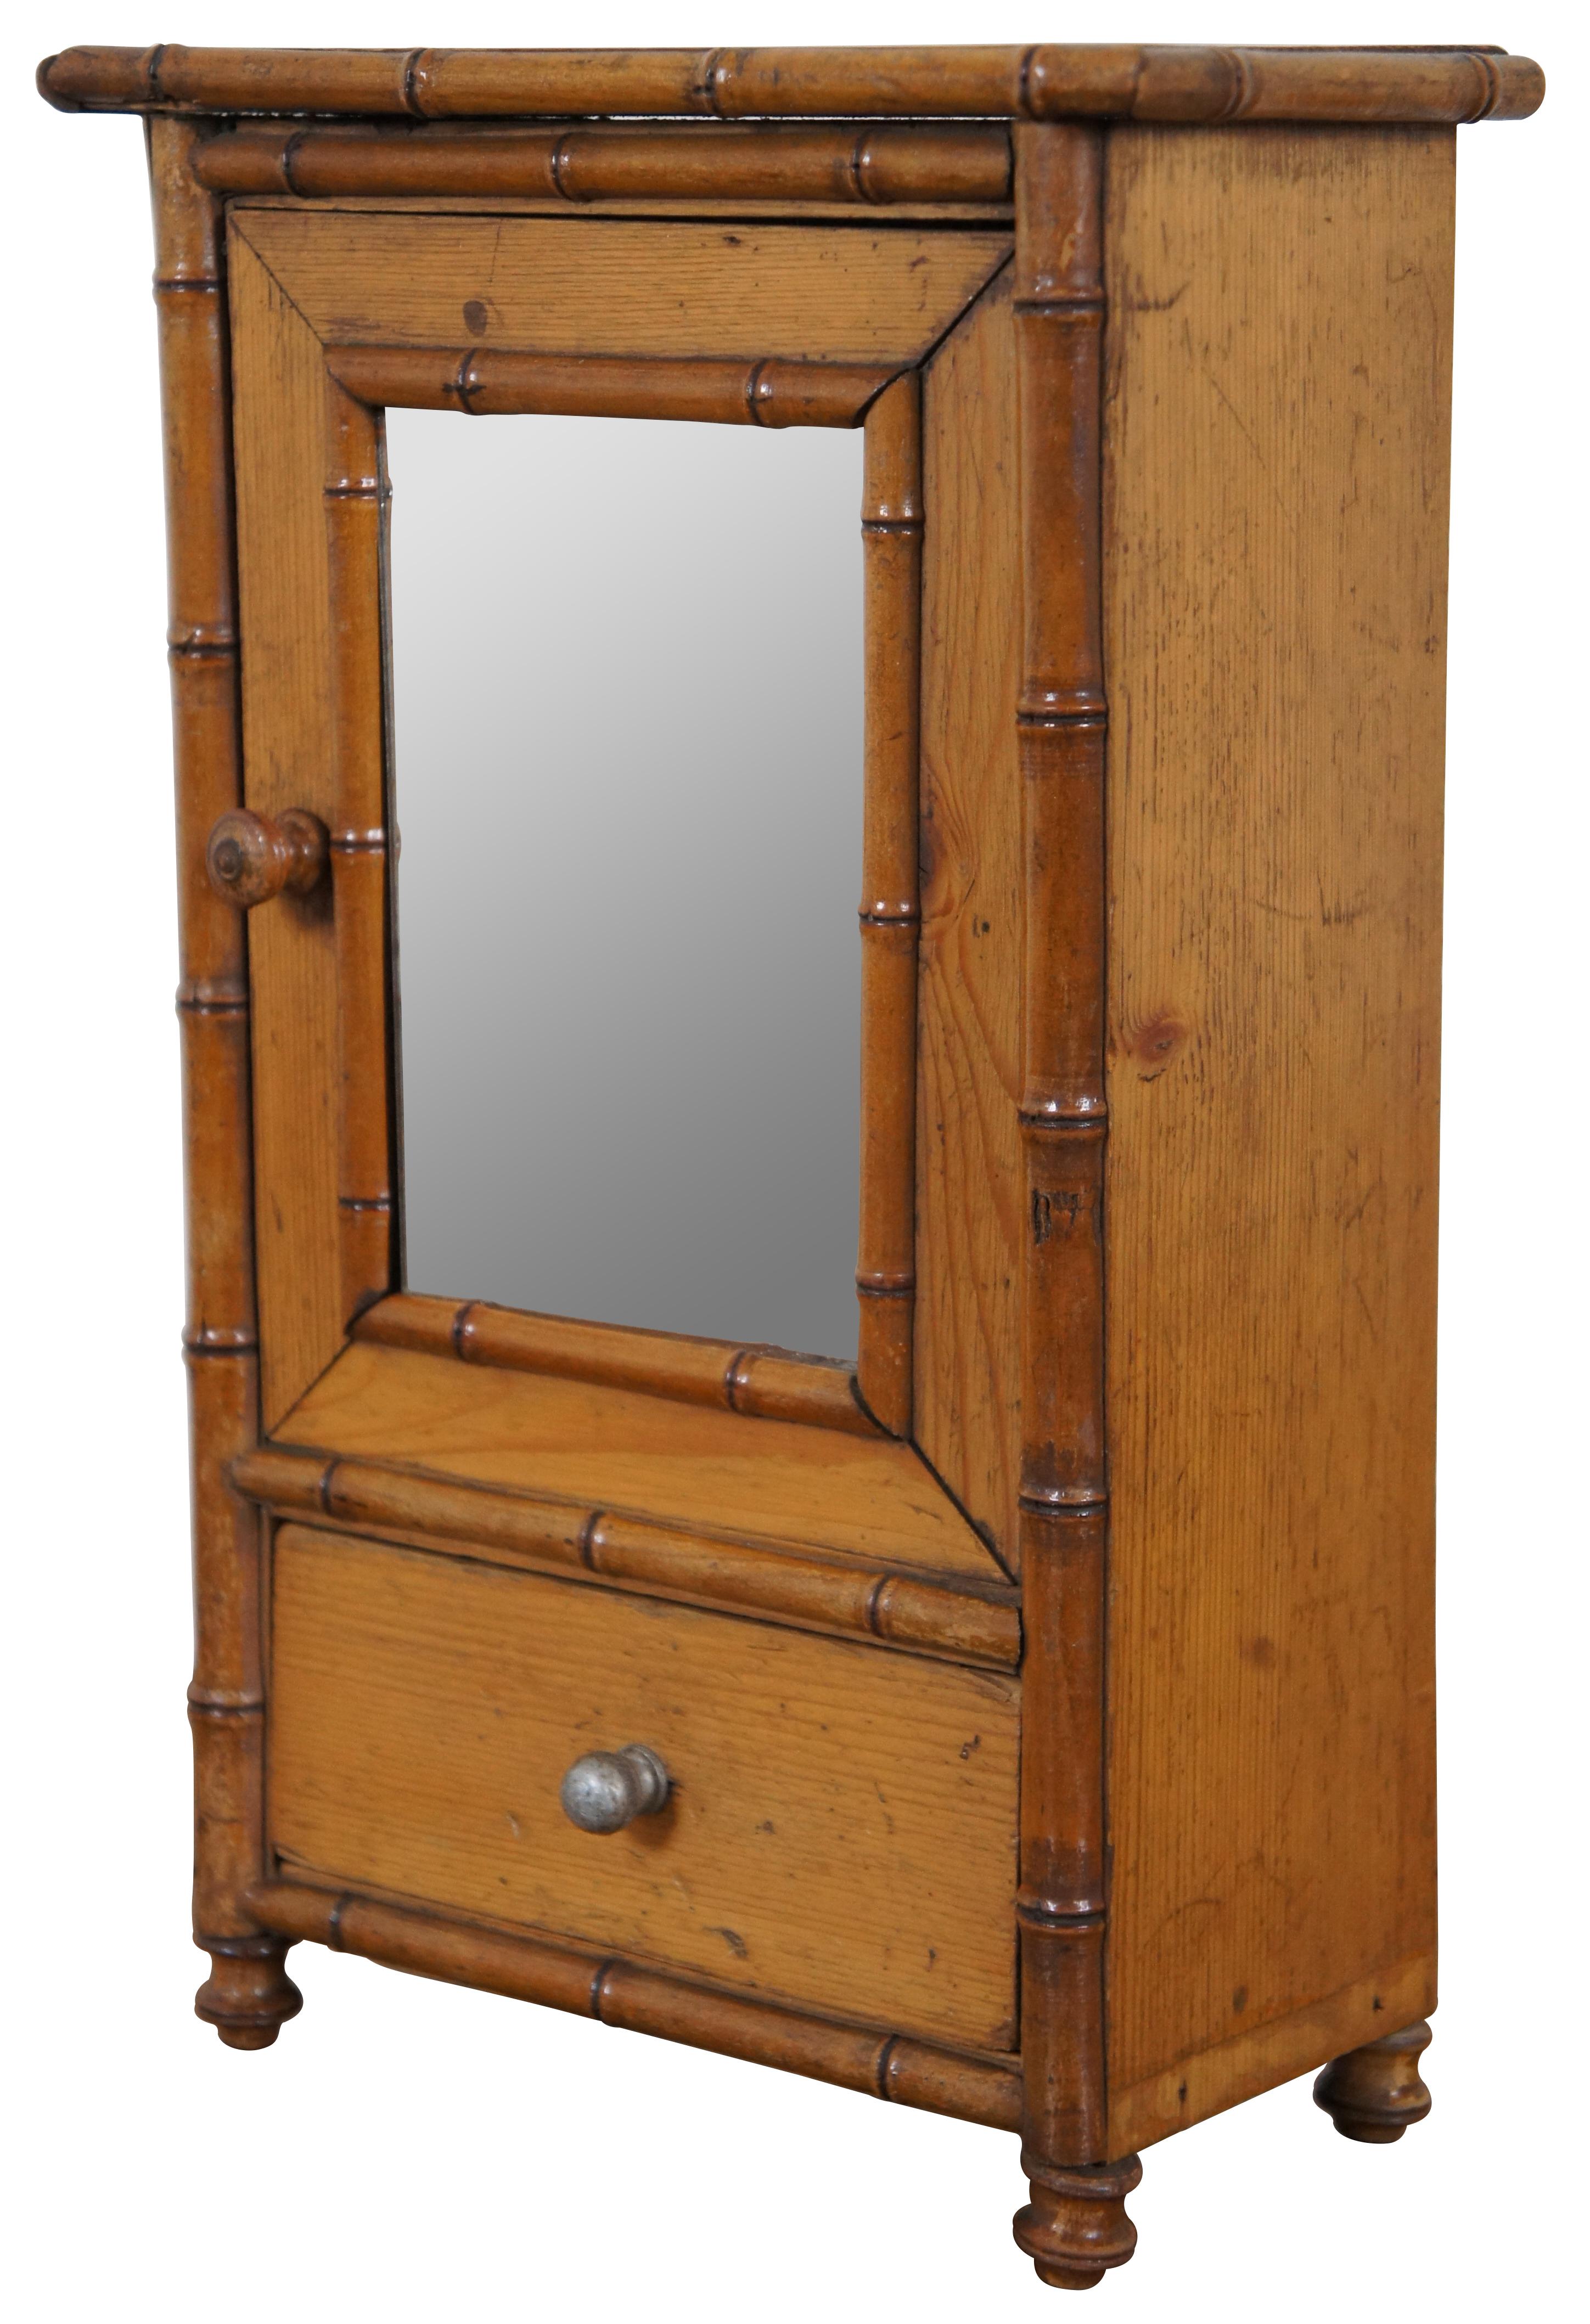 Early 20th century doll furniture miniature wardrobe featuring a bamboo frame, mirrored door and lower drawer for accessories.